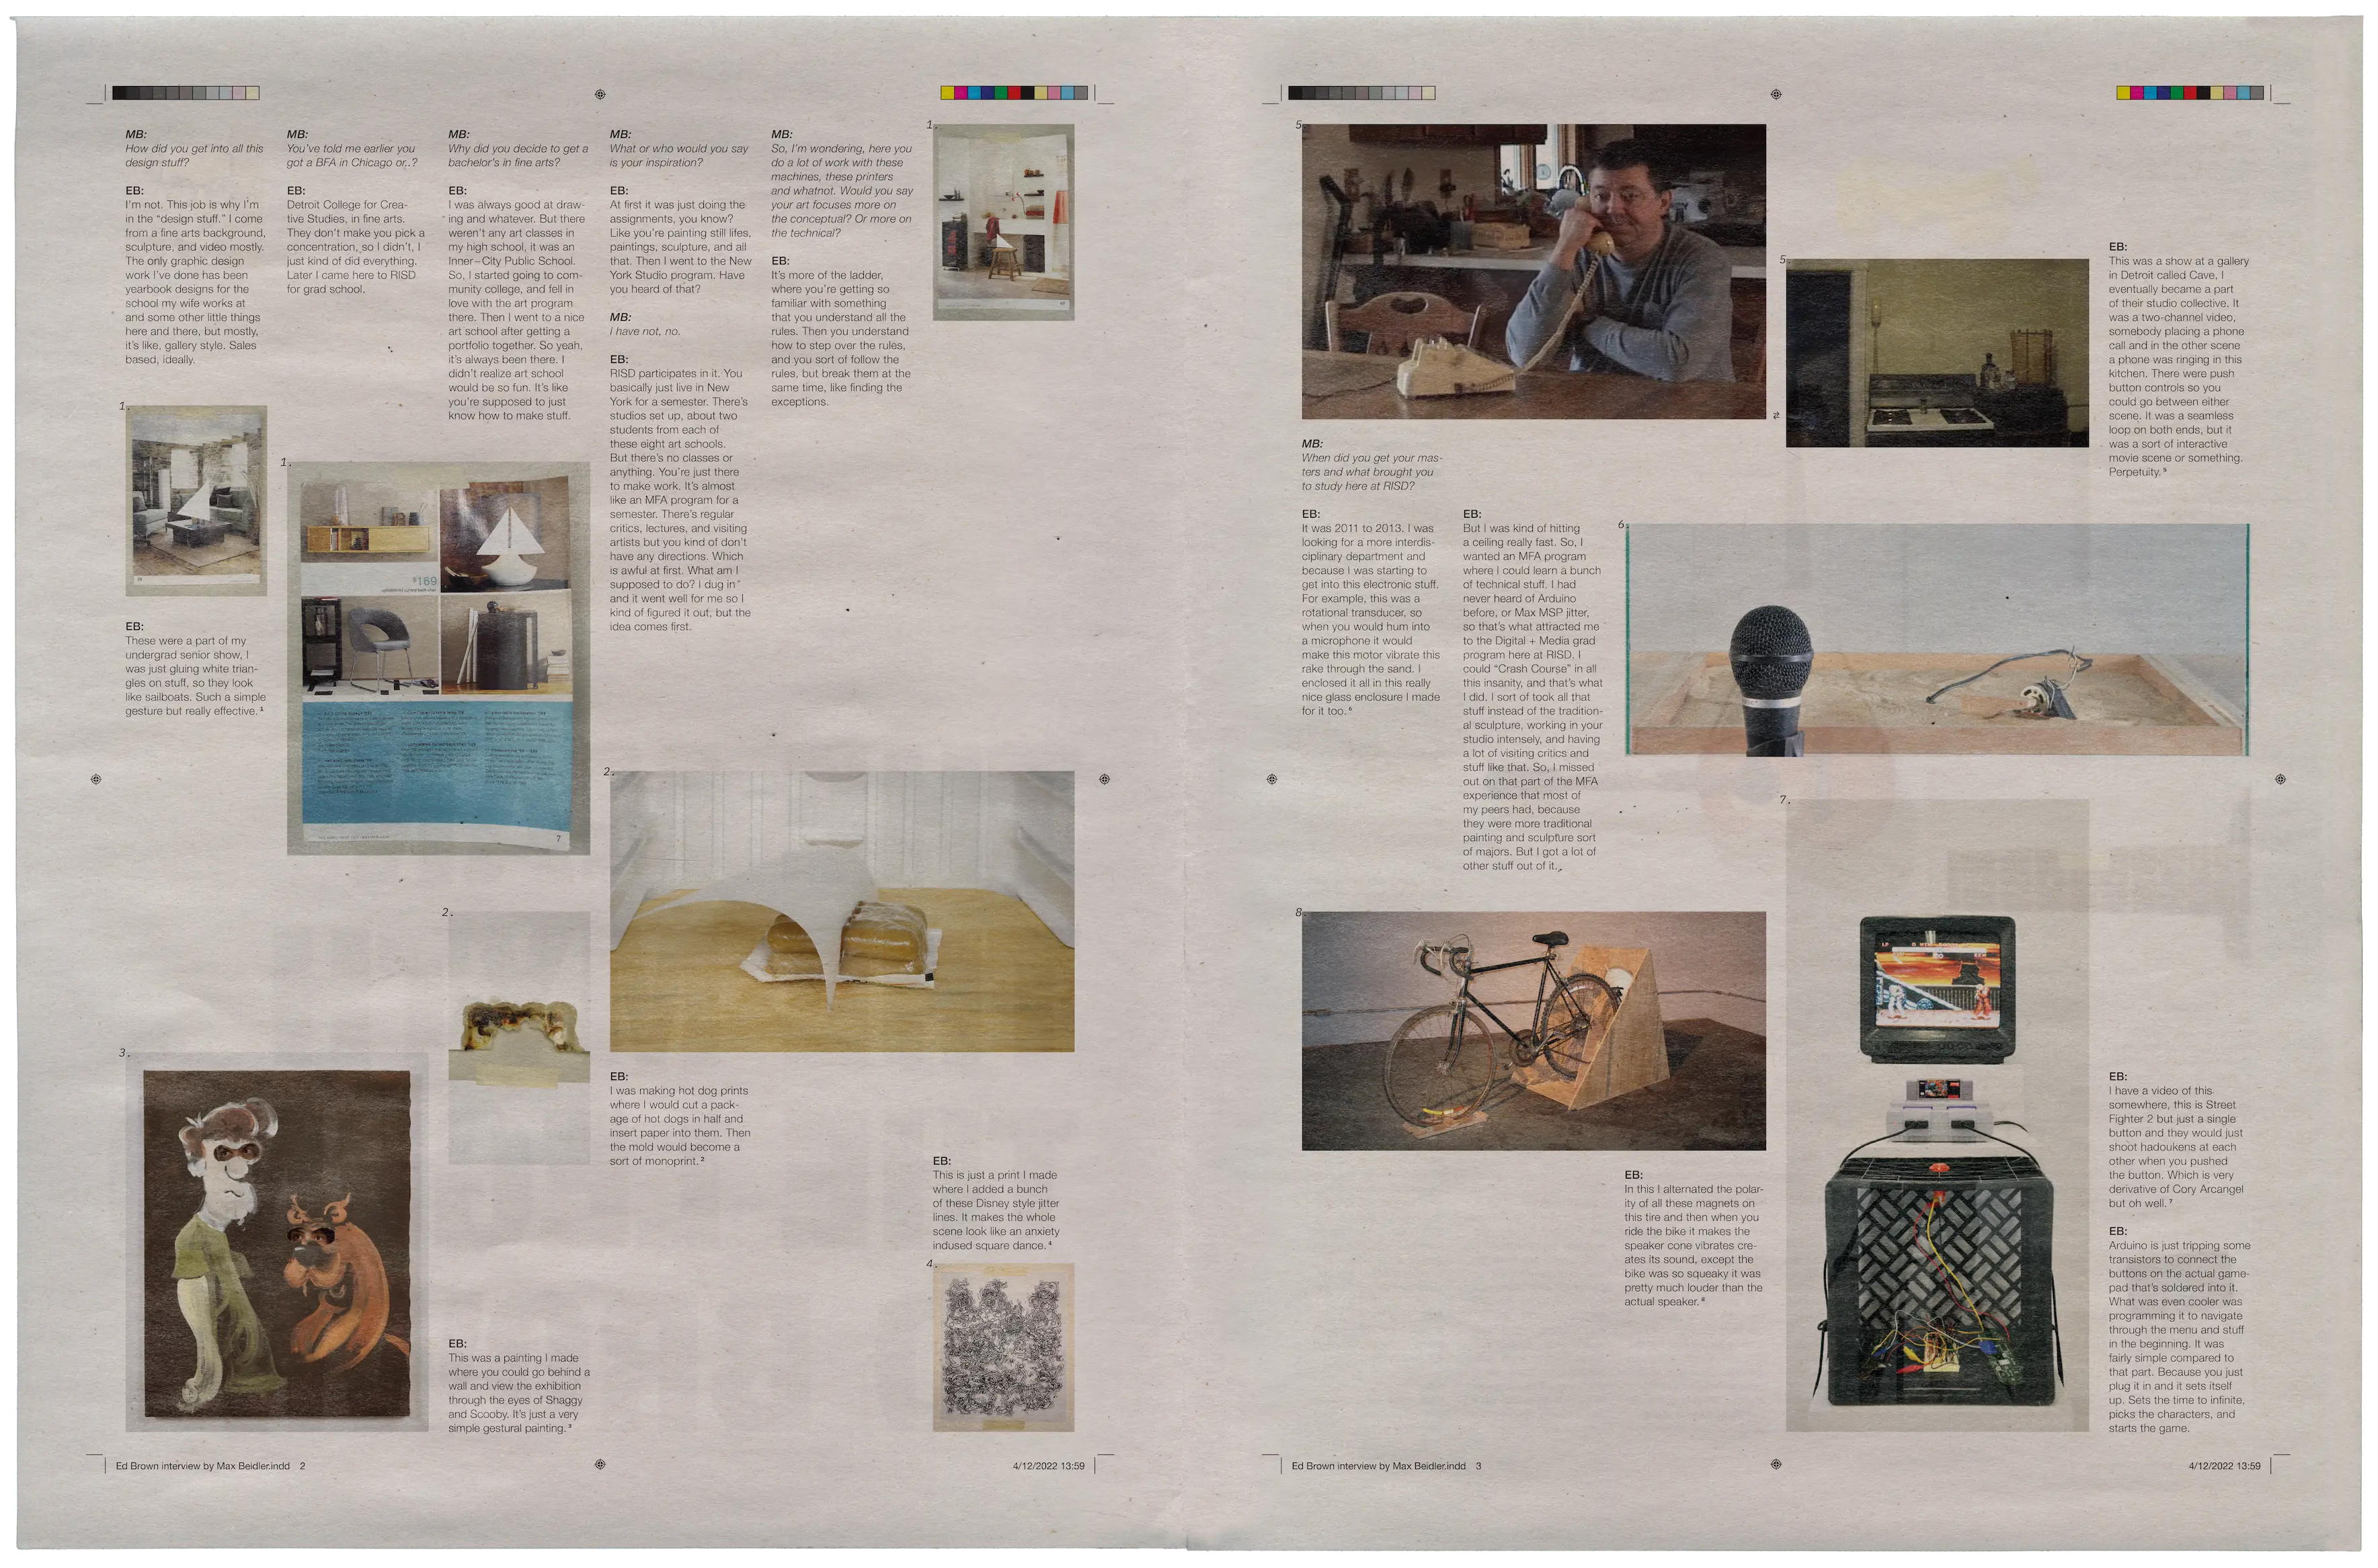 The center spread of the interview printed publication.